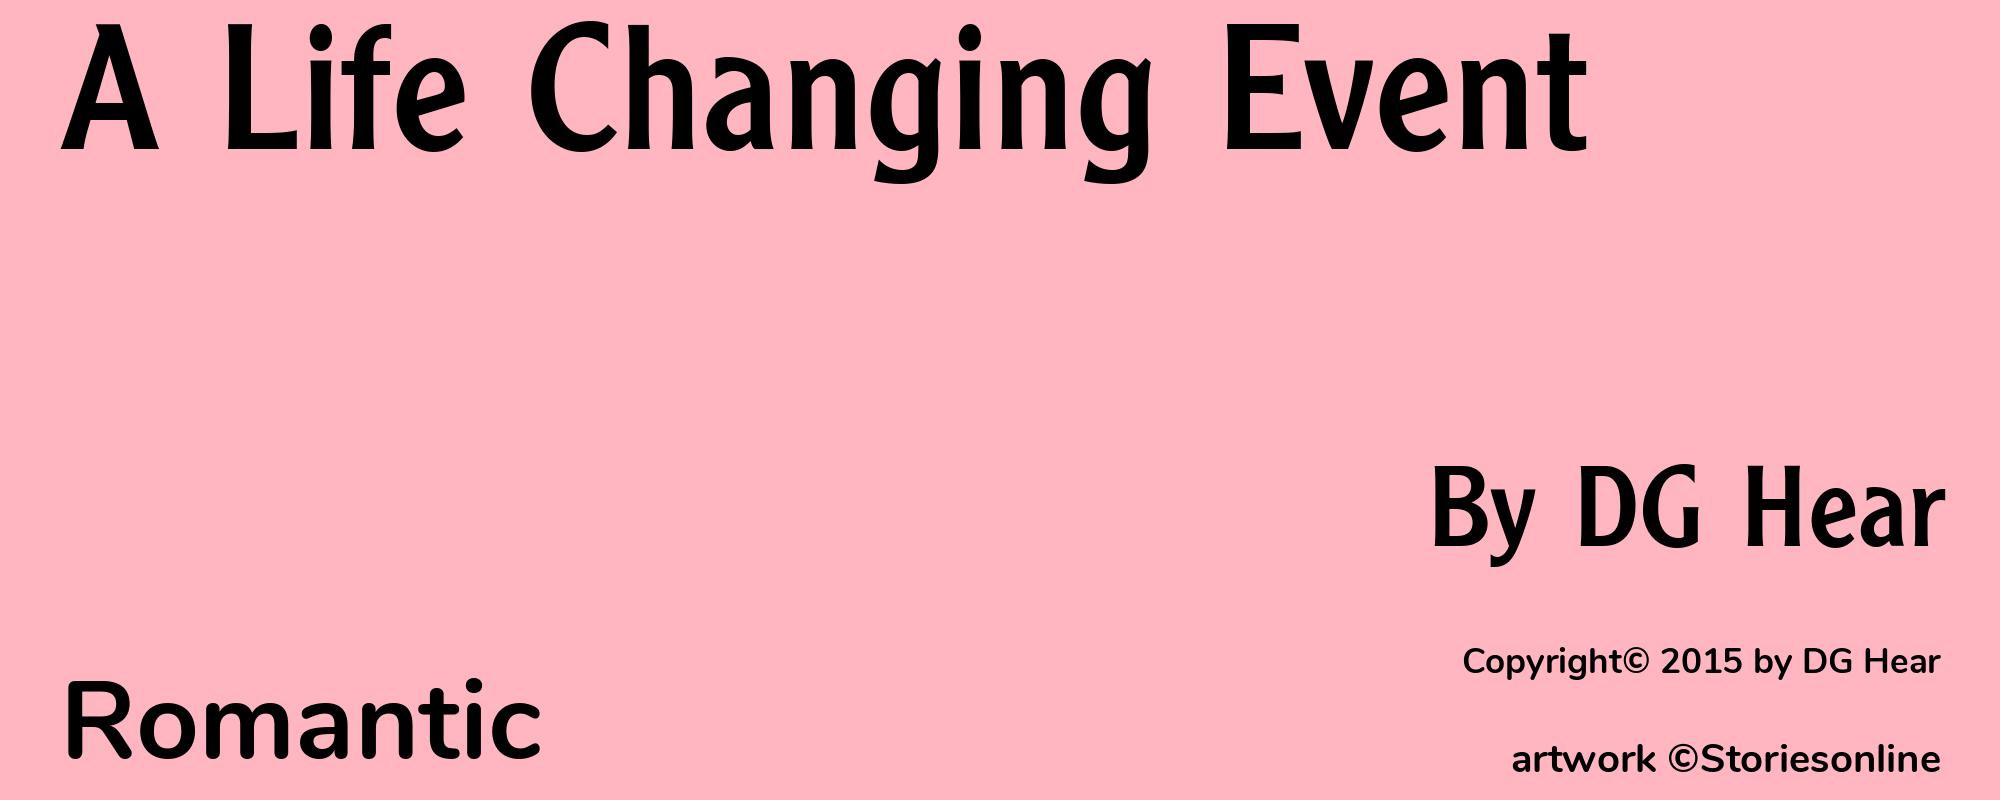 A Life Changing Event - Cover